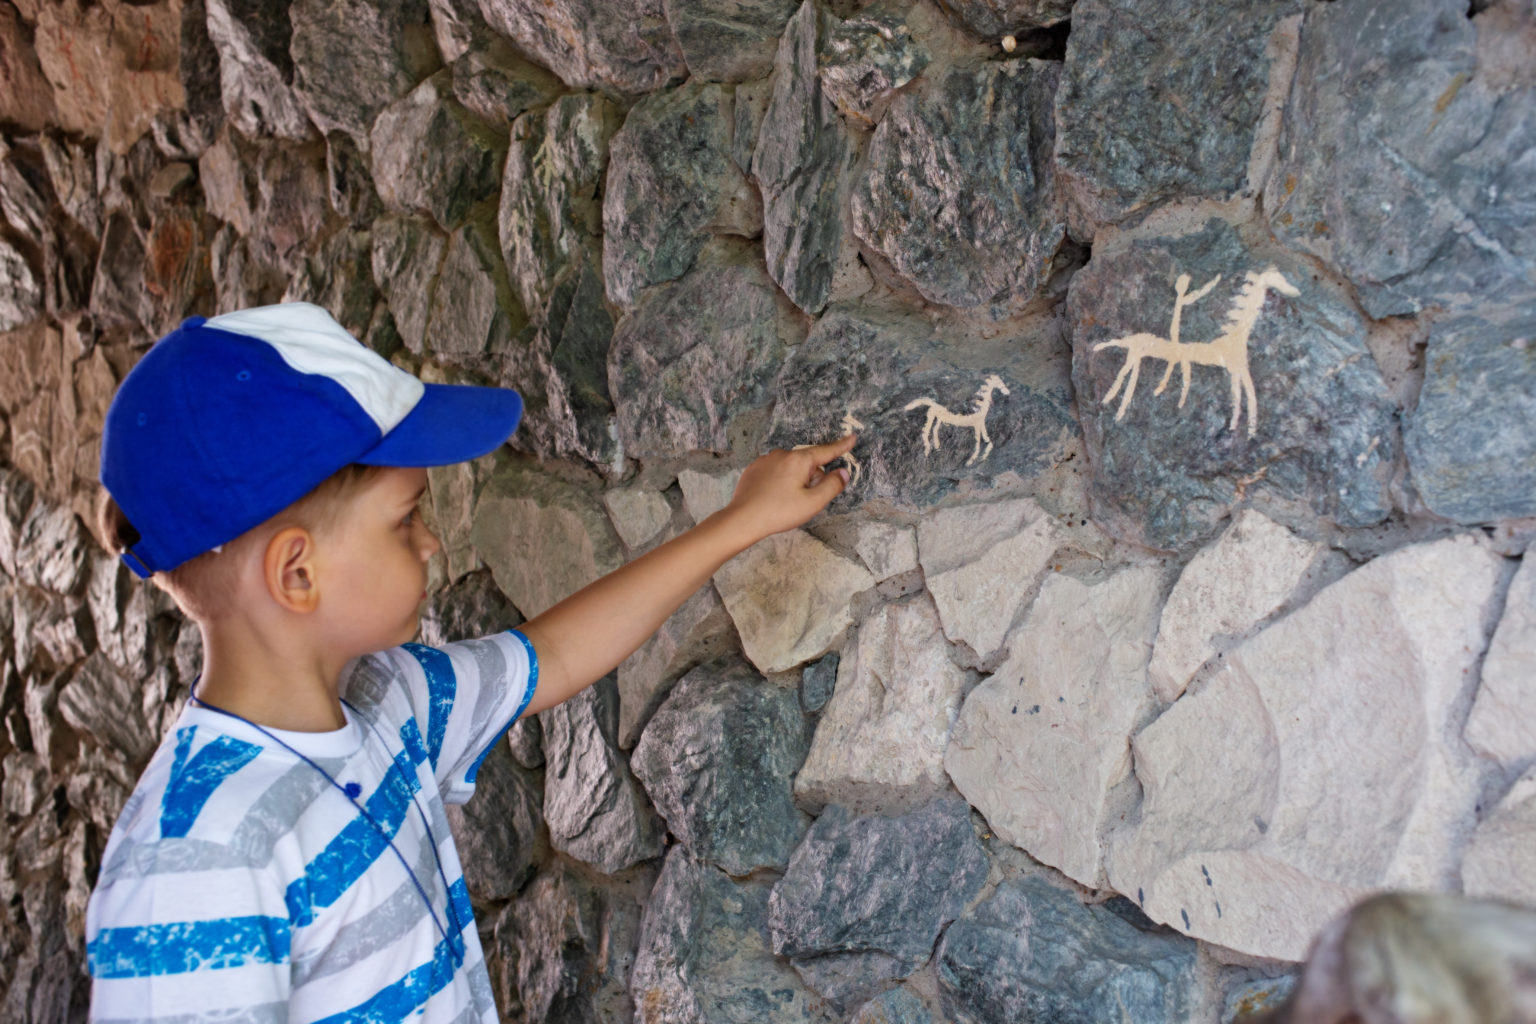 Ancient cave paintings and little boy. Bronze Age culture dated; history of st. paul